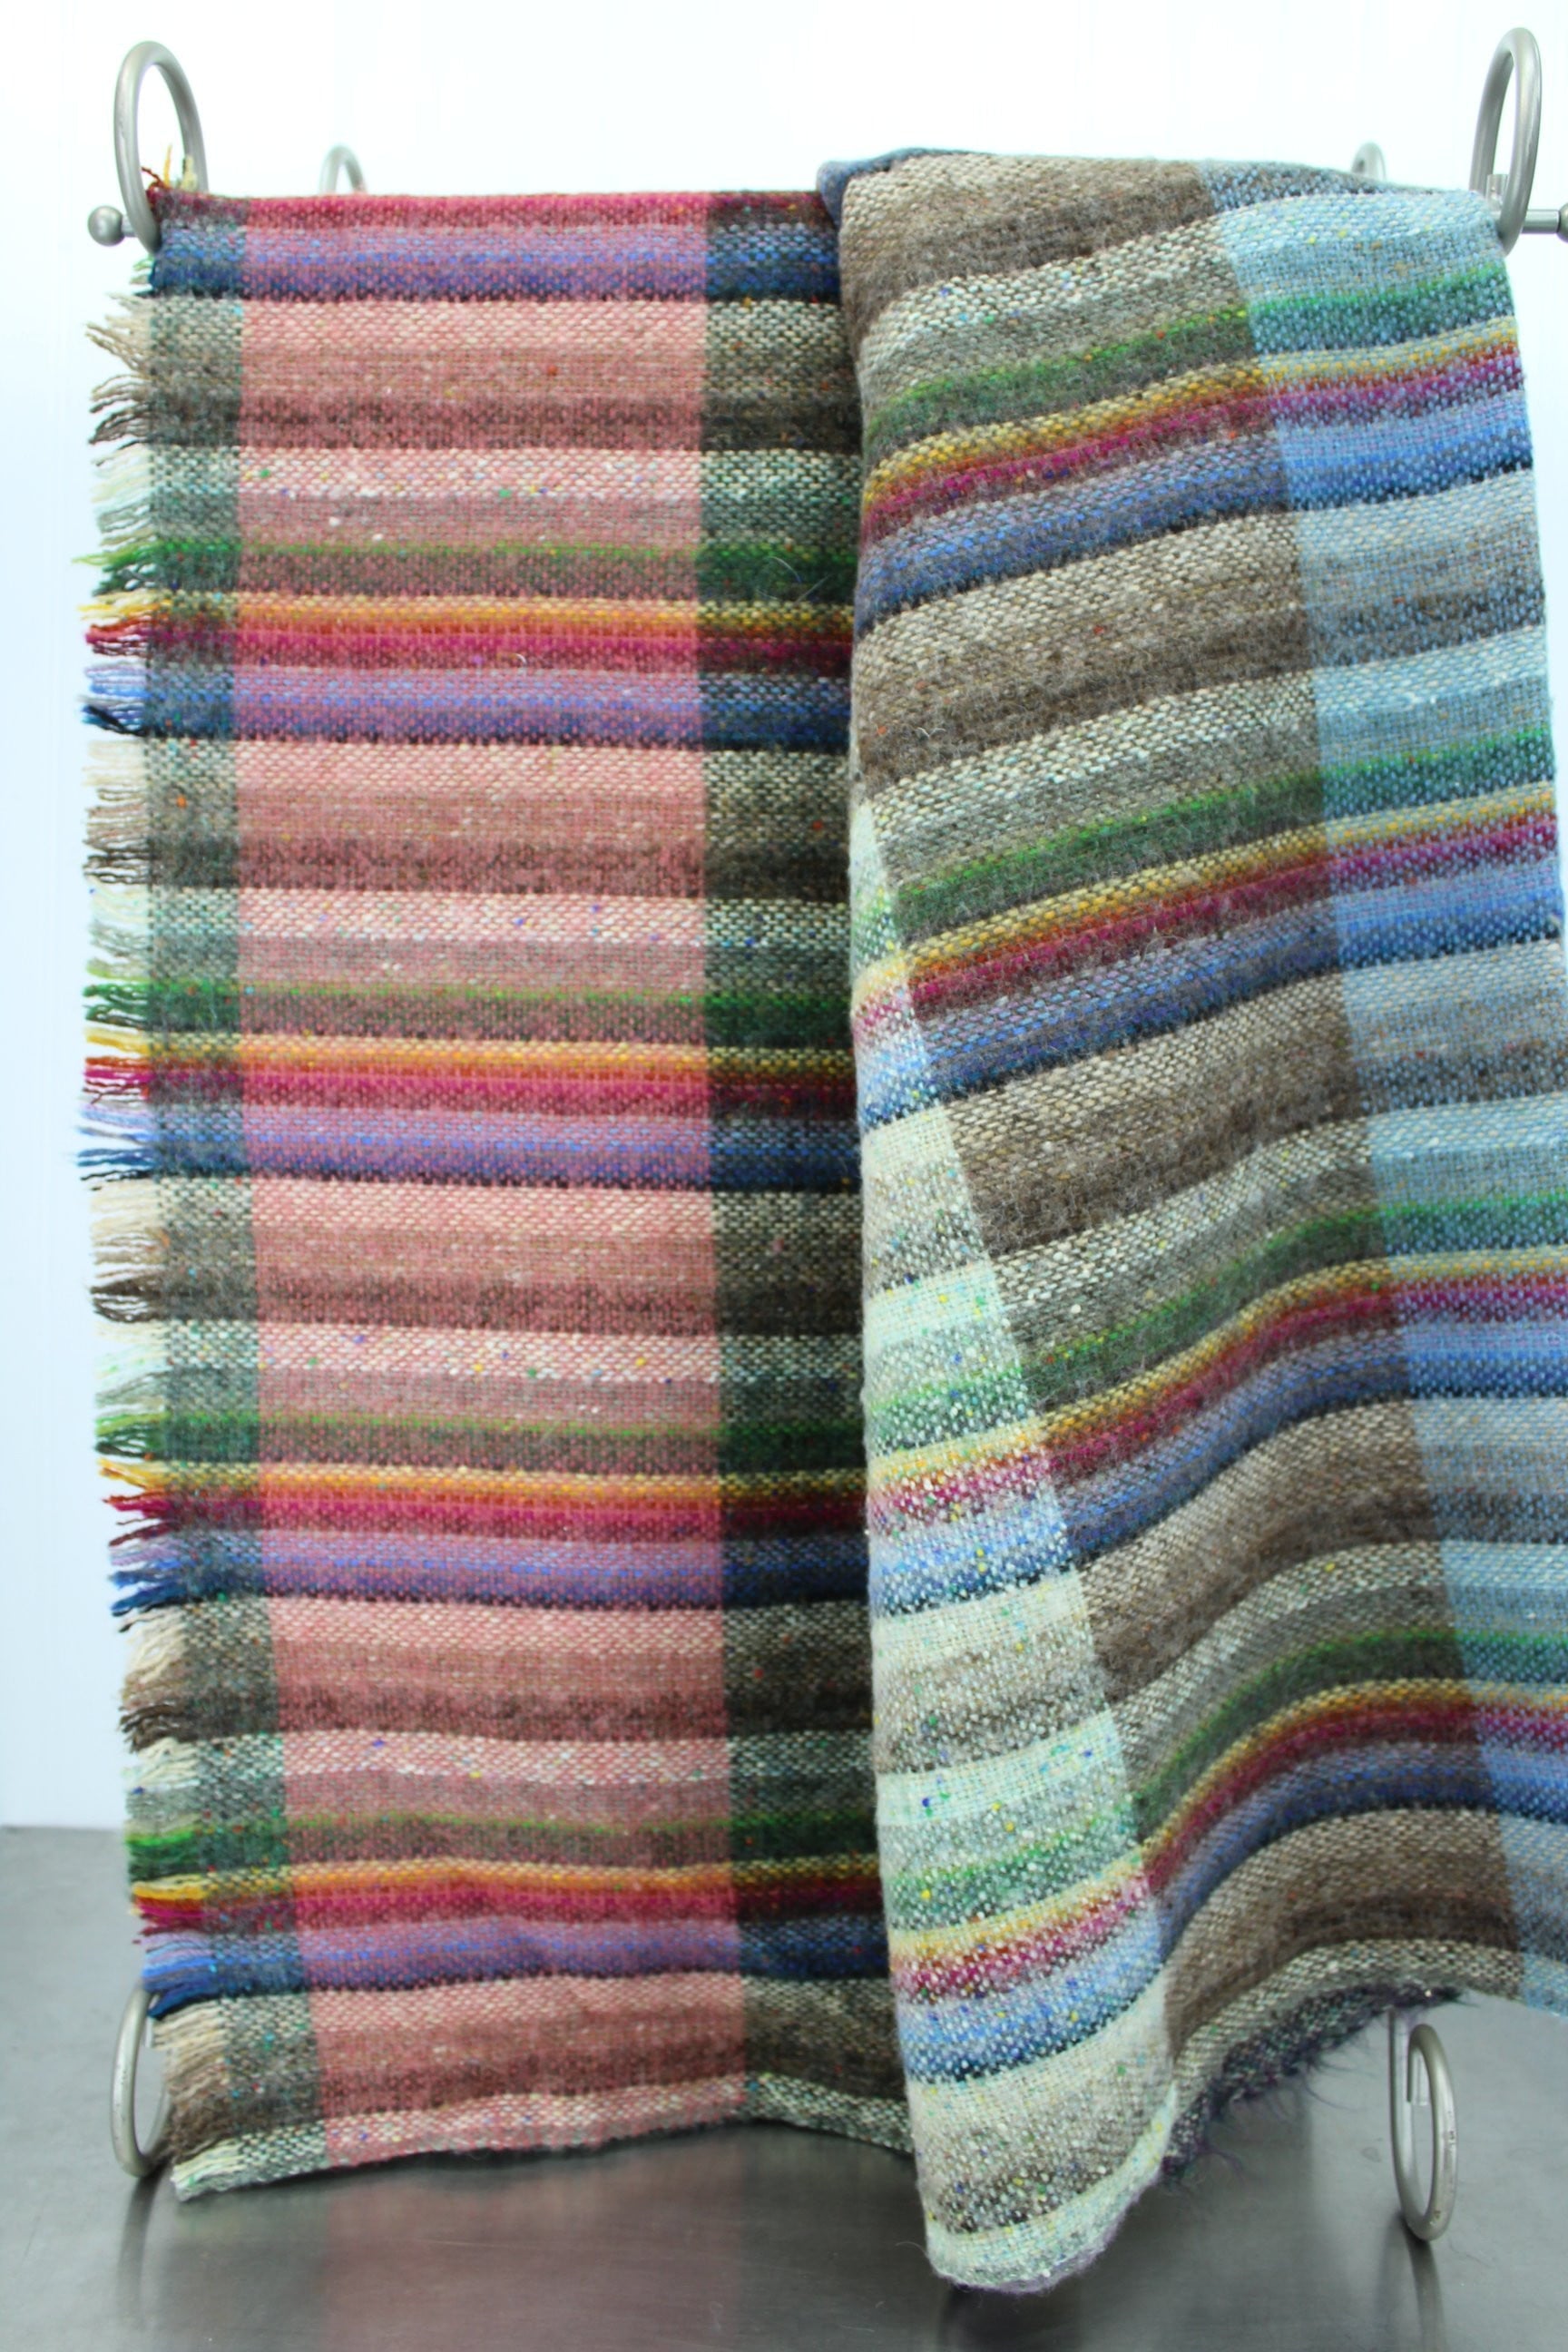 Donegal Handwoven Tweed John Molloy Throw Blanket - Lambswool Fringed Awesome blues pink rose